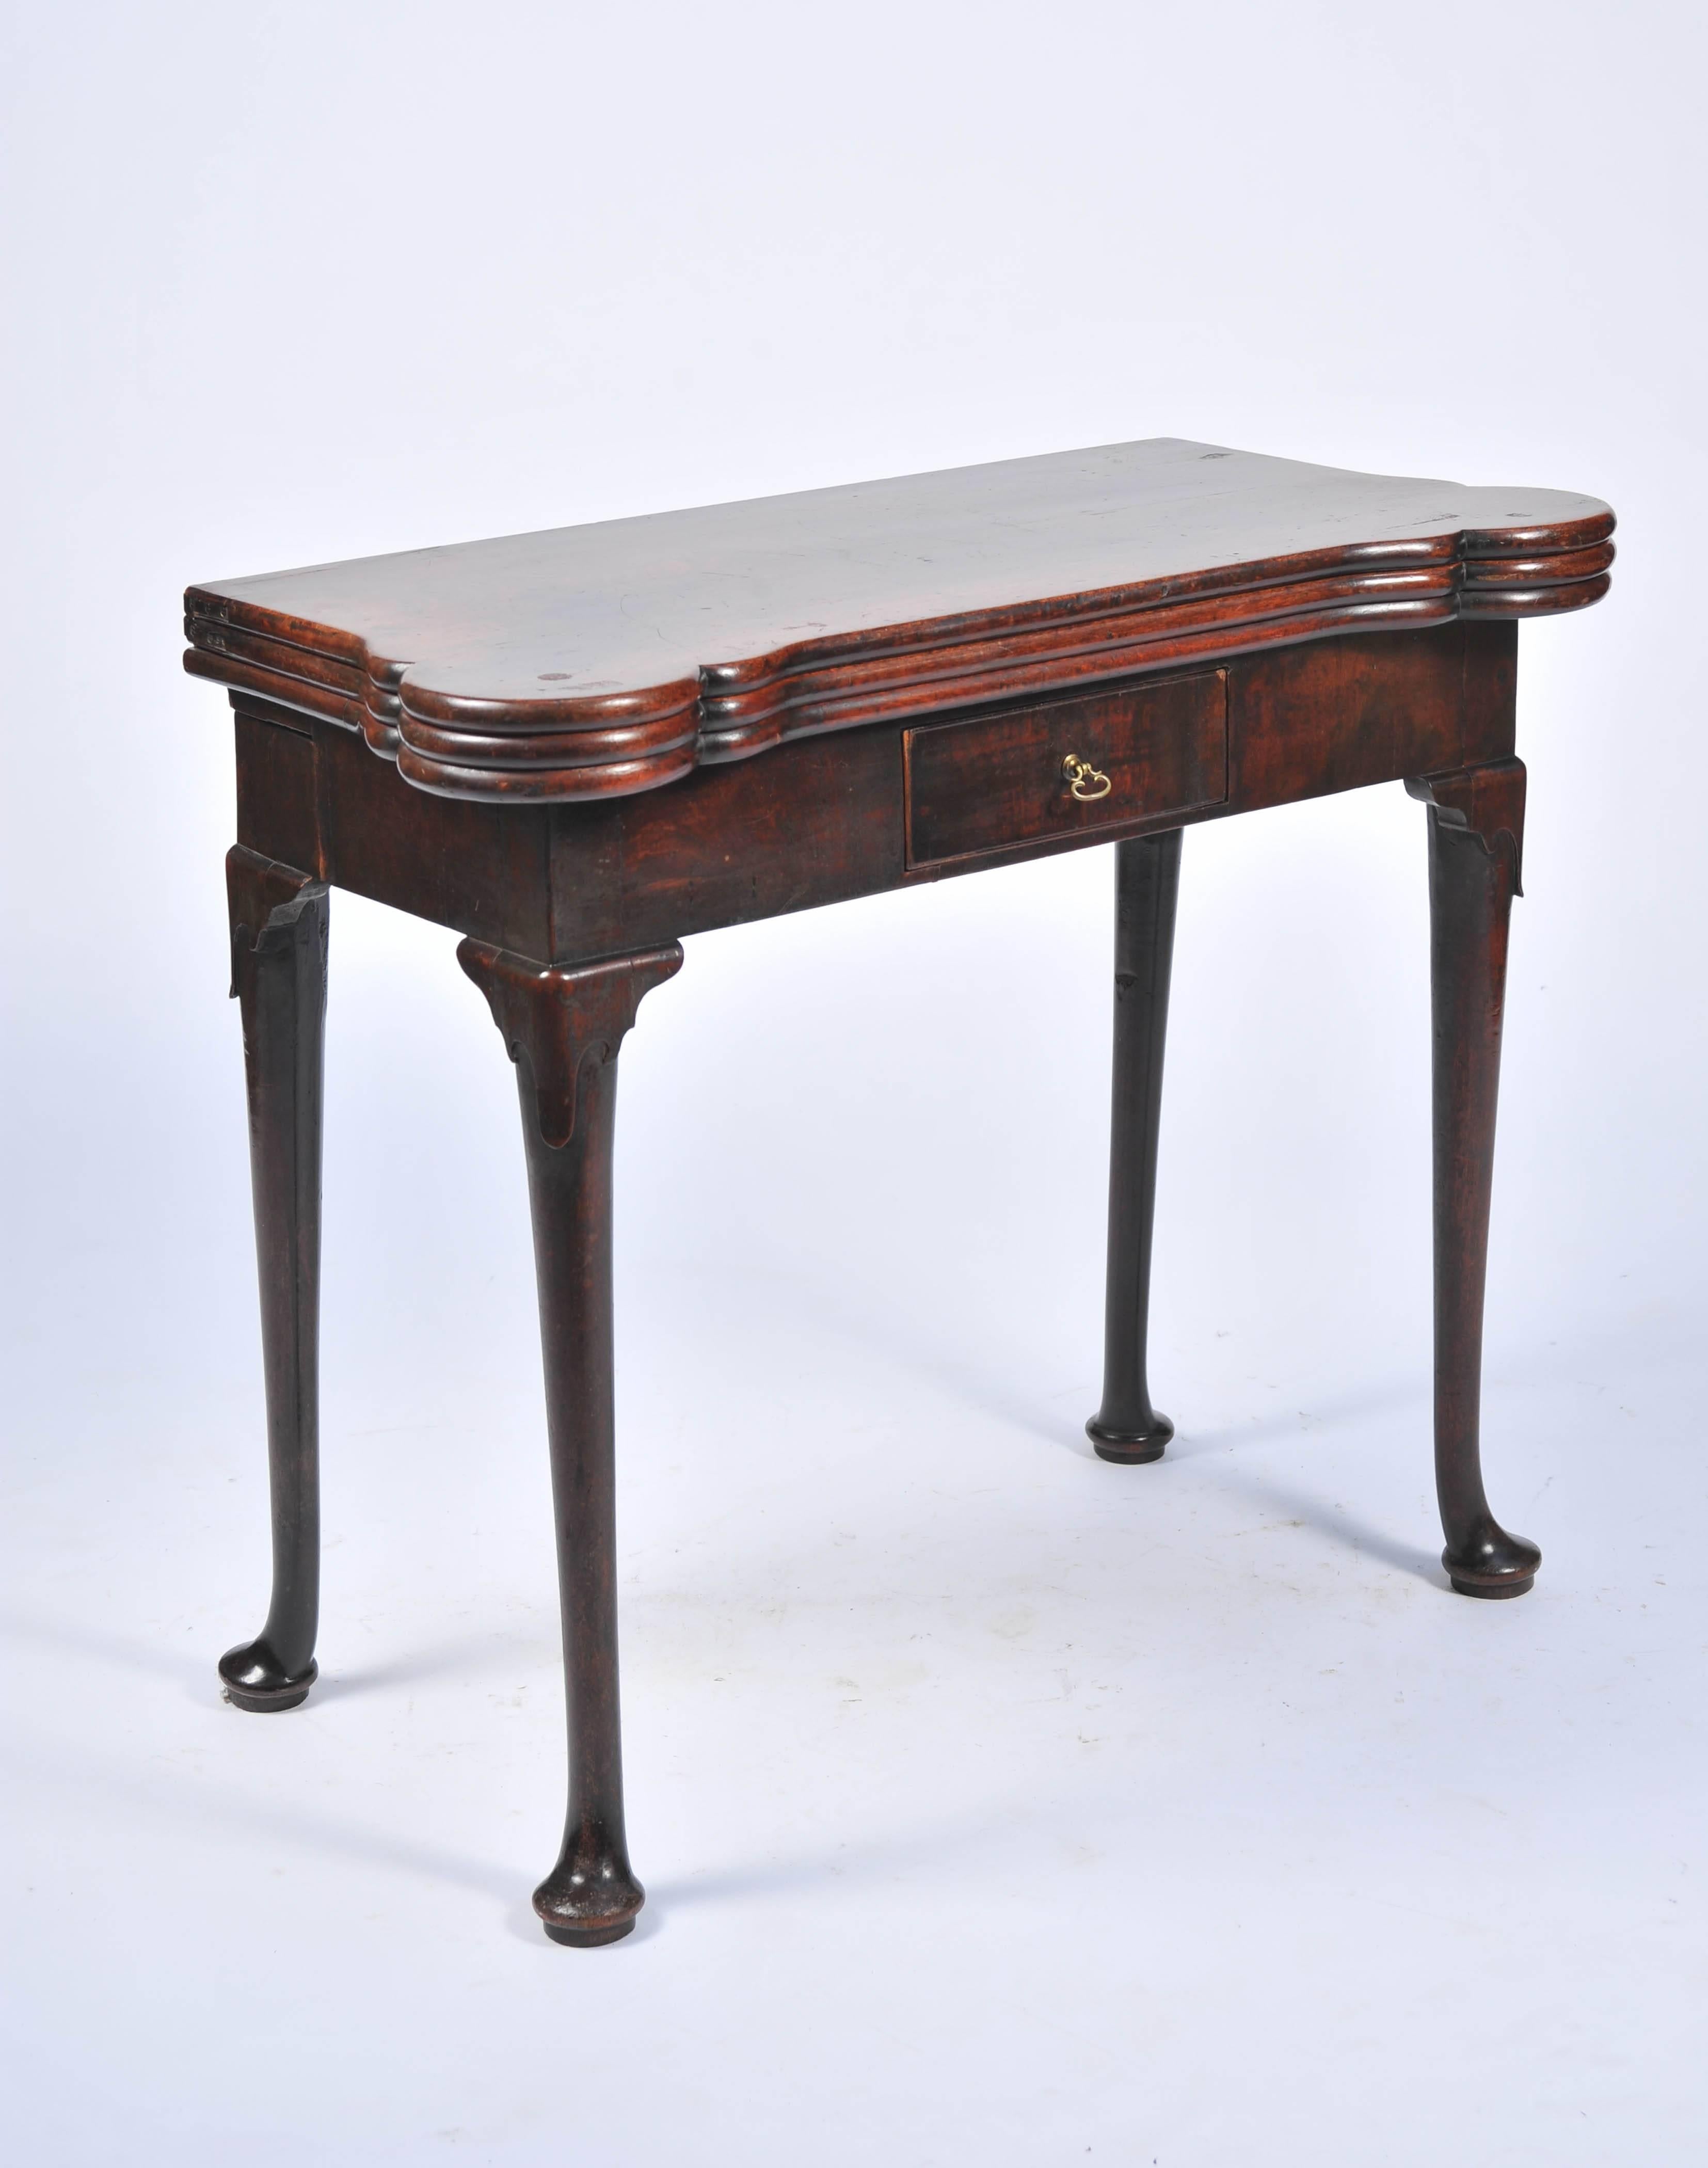 A rare triple layer George II mahogany card table, with a concertina action to the legs. The top unfolding to reveal a tea table with polished mahogany top, opening again to reveal a card table with carved recesses and a baize playing surface.